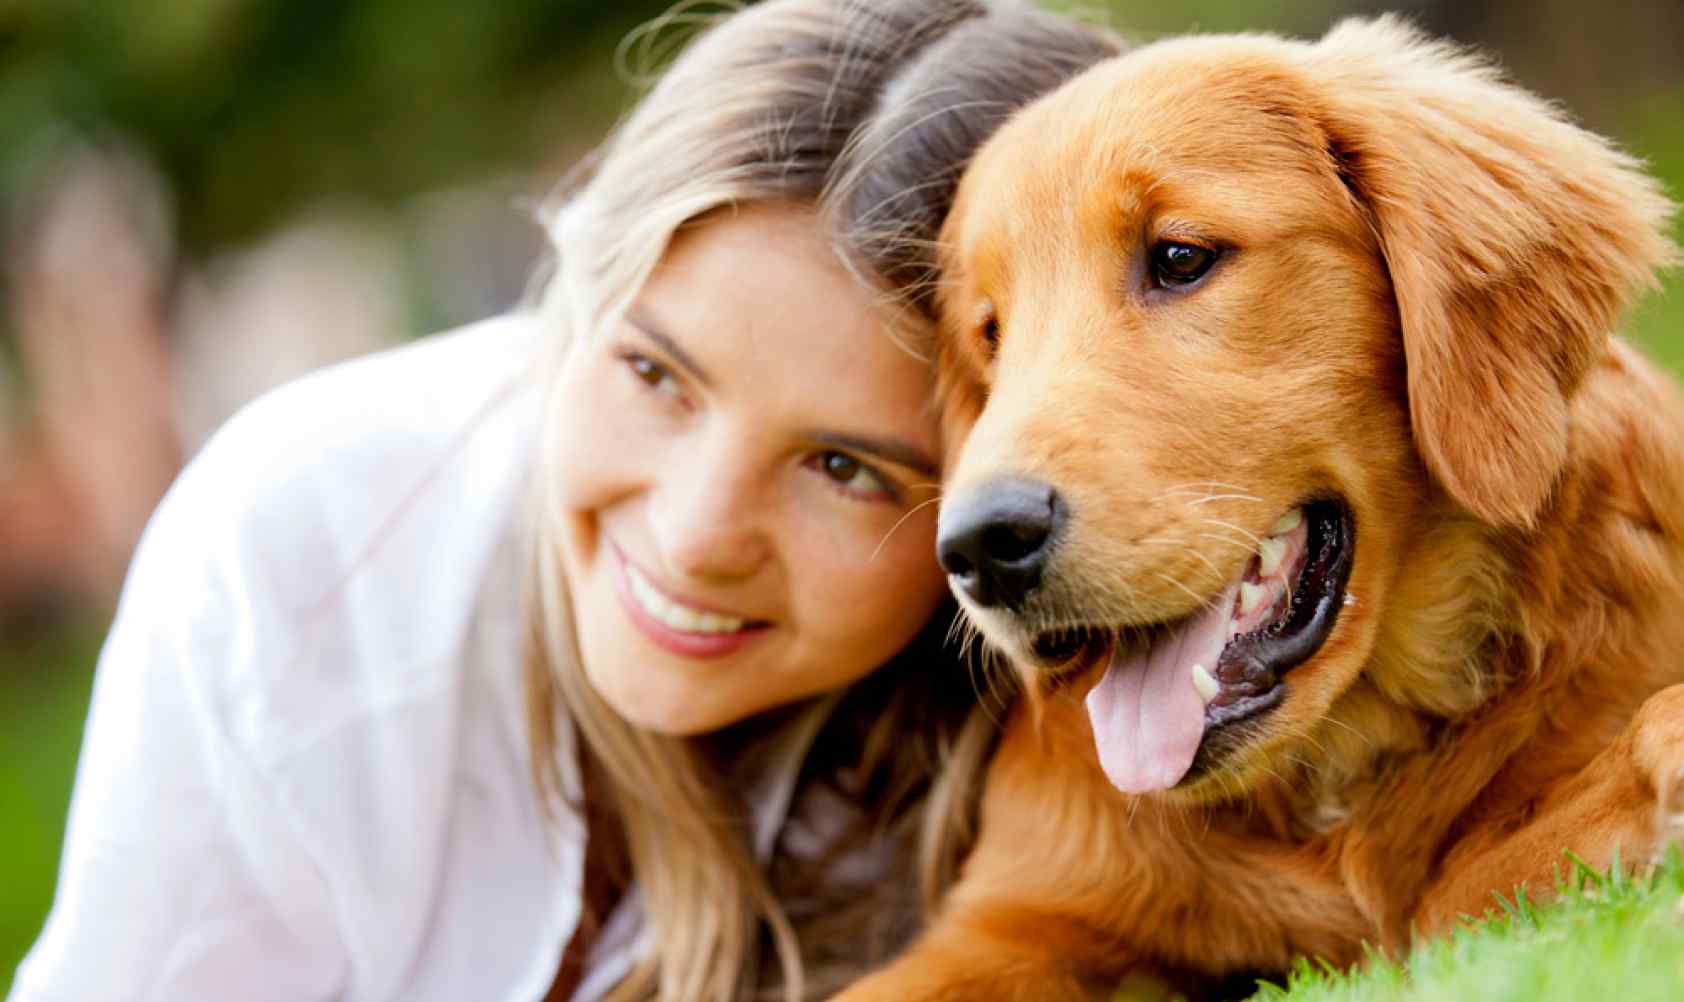 Care For Your Dog: 6 Common Mistakes To Avoid